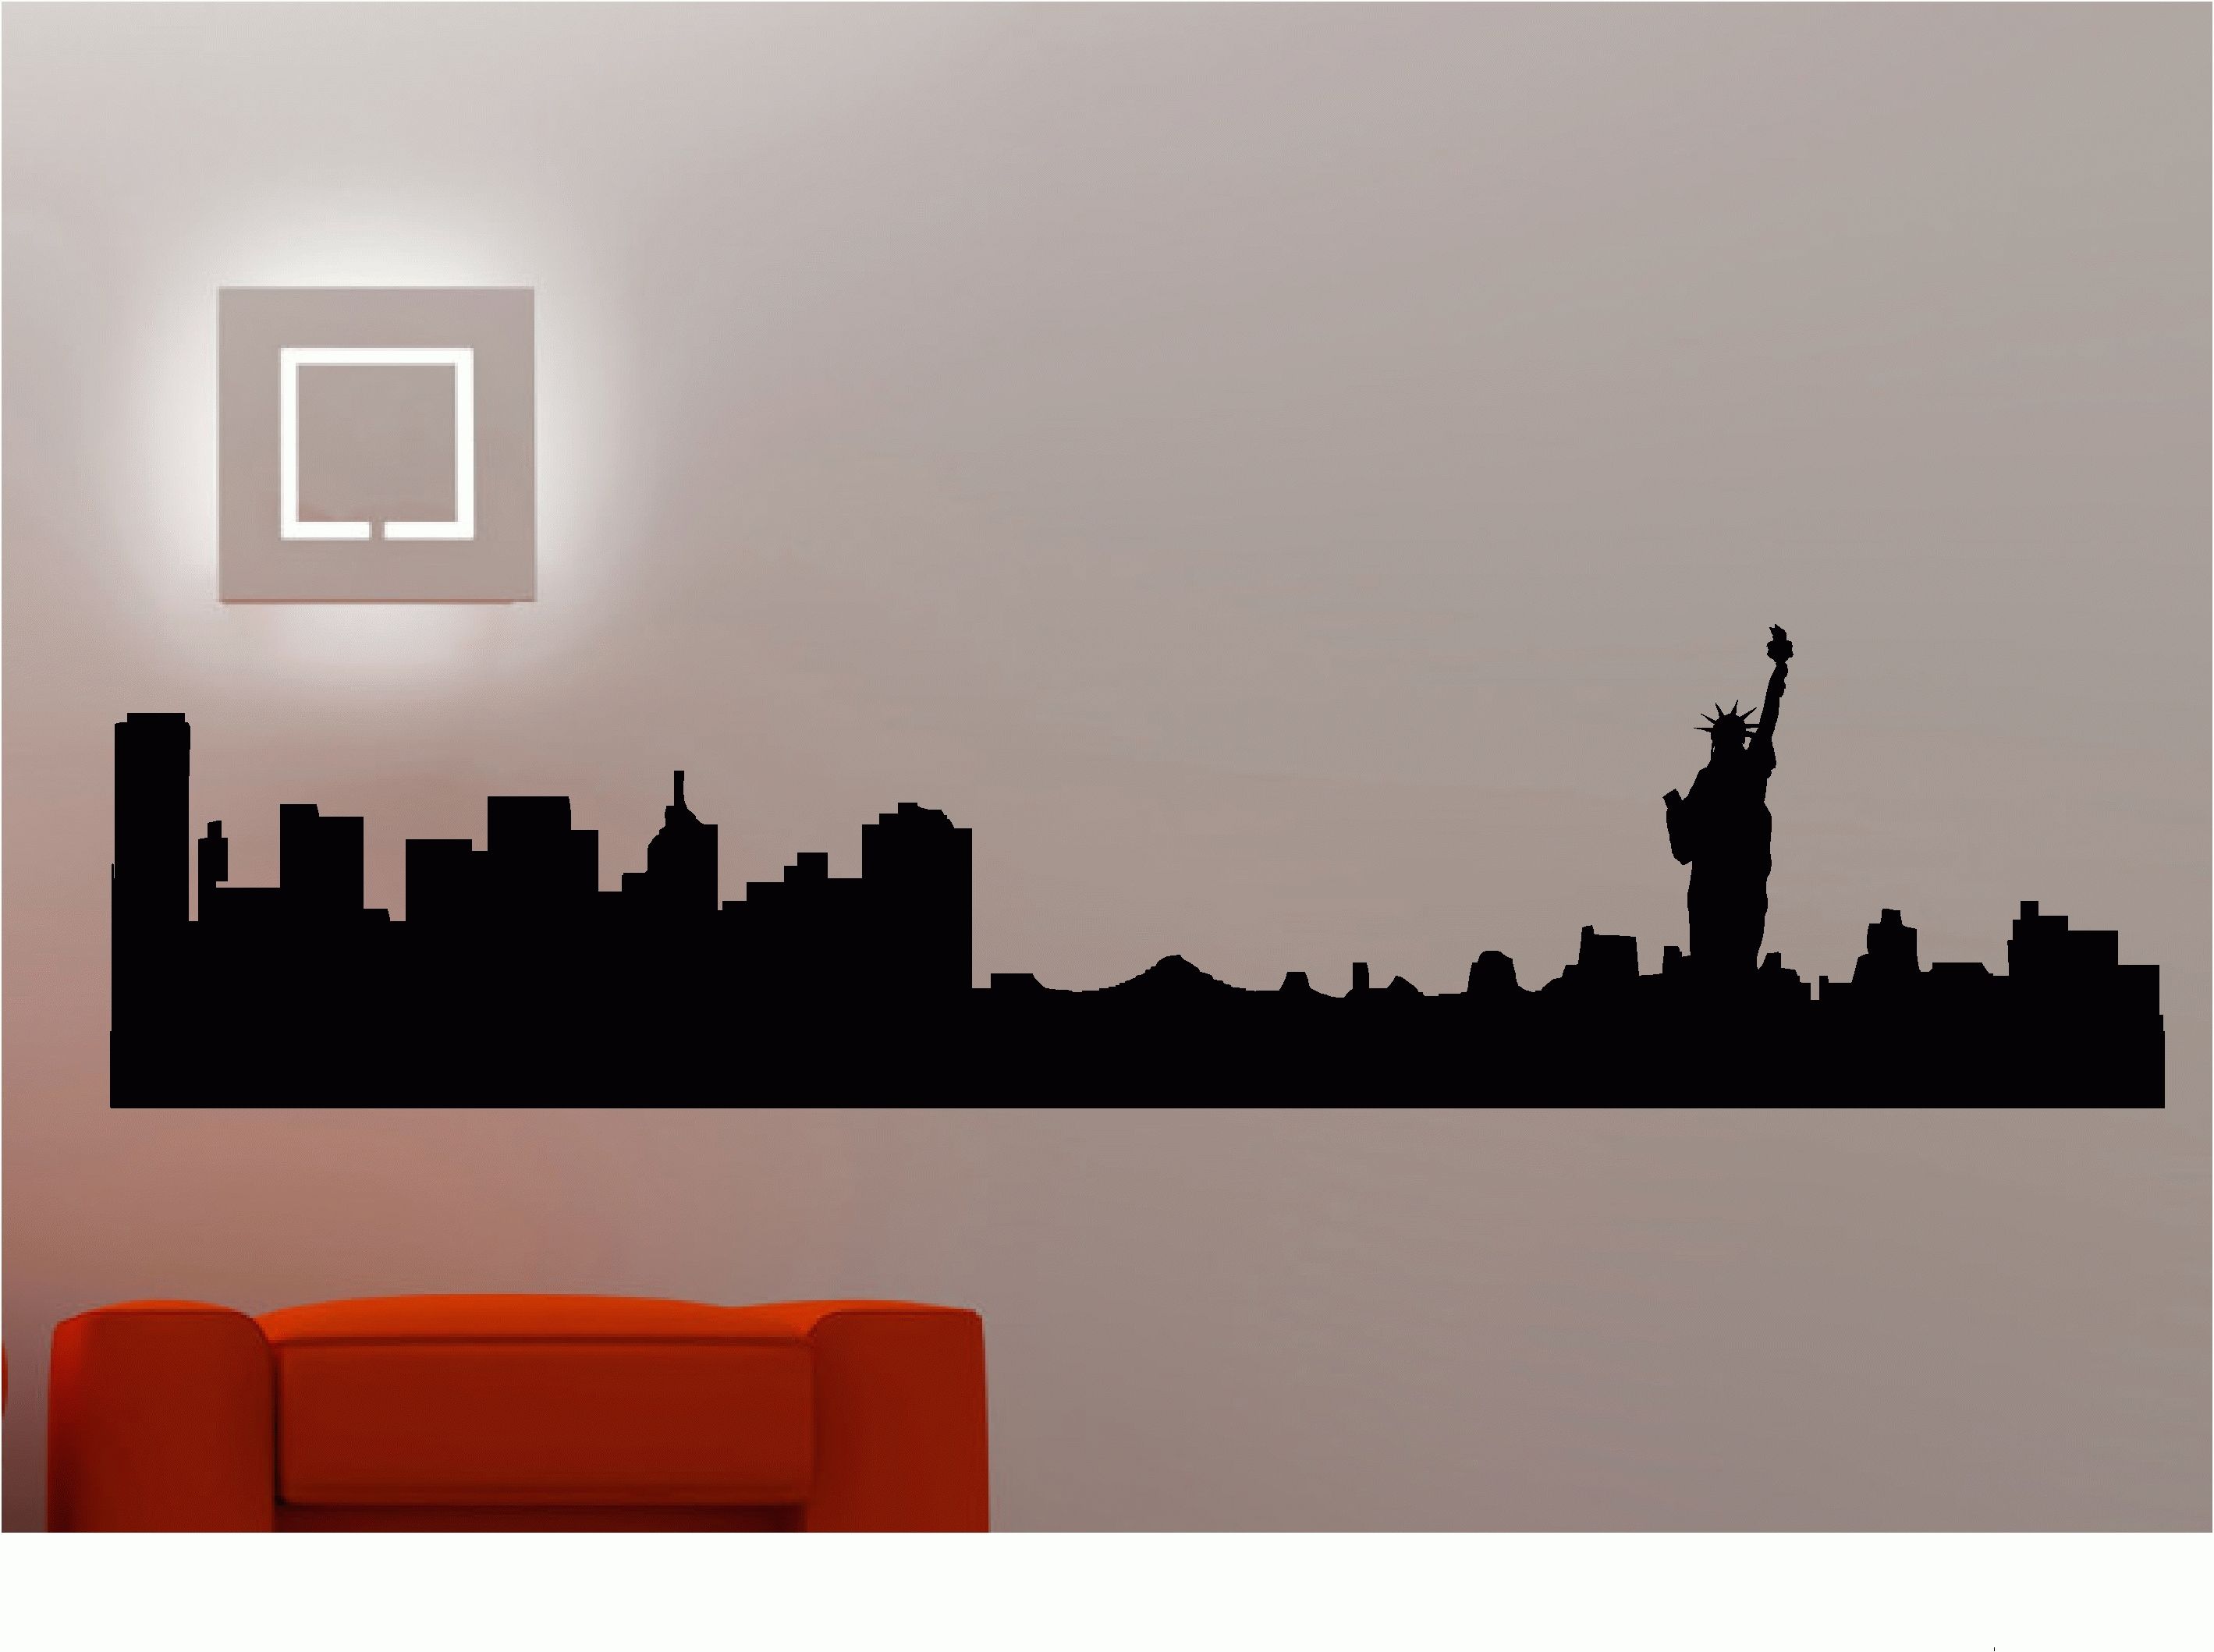 New York City Skyline Wall Stickers / Wall Decals Vinyl Art Decals Throughout Most Popular New York Wall Art (View 11 of 20)